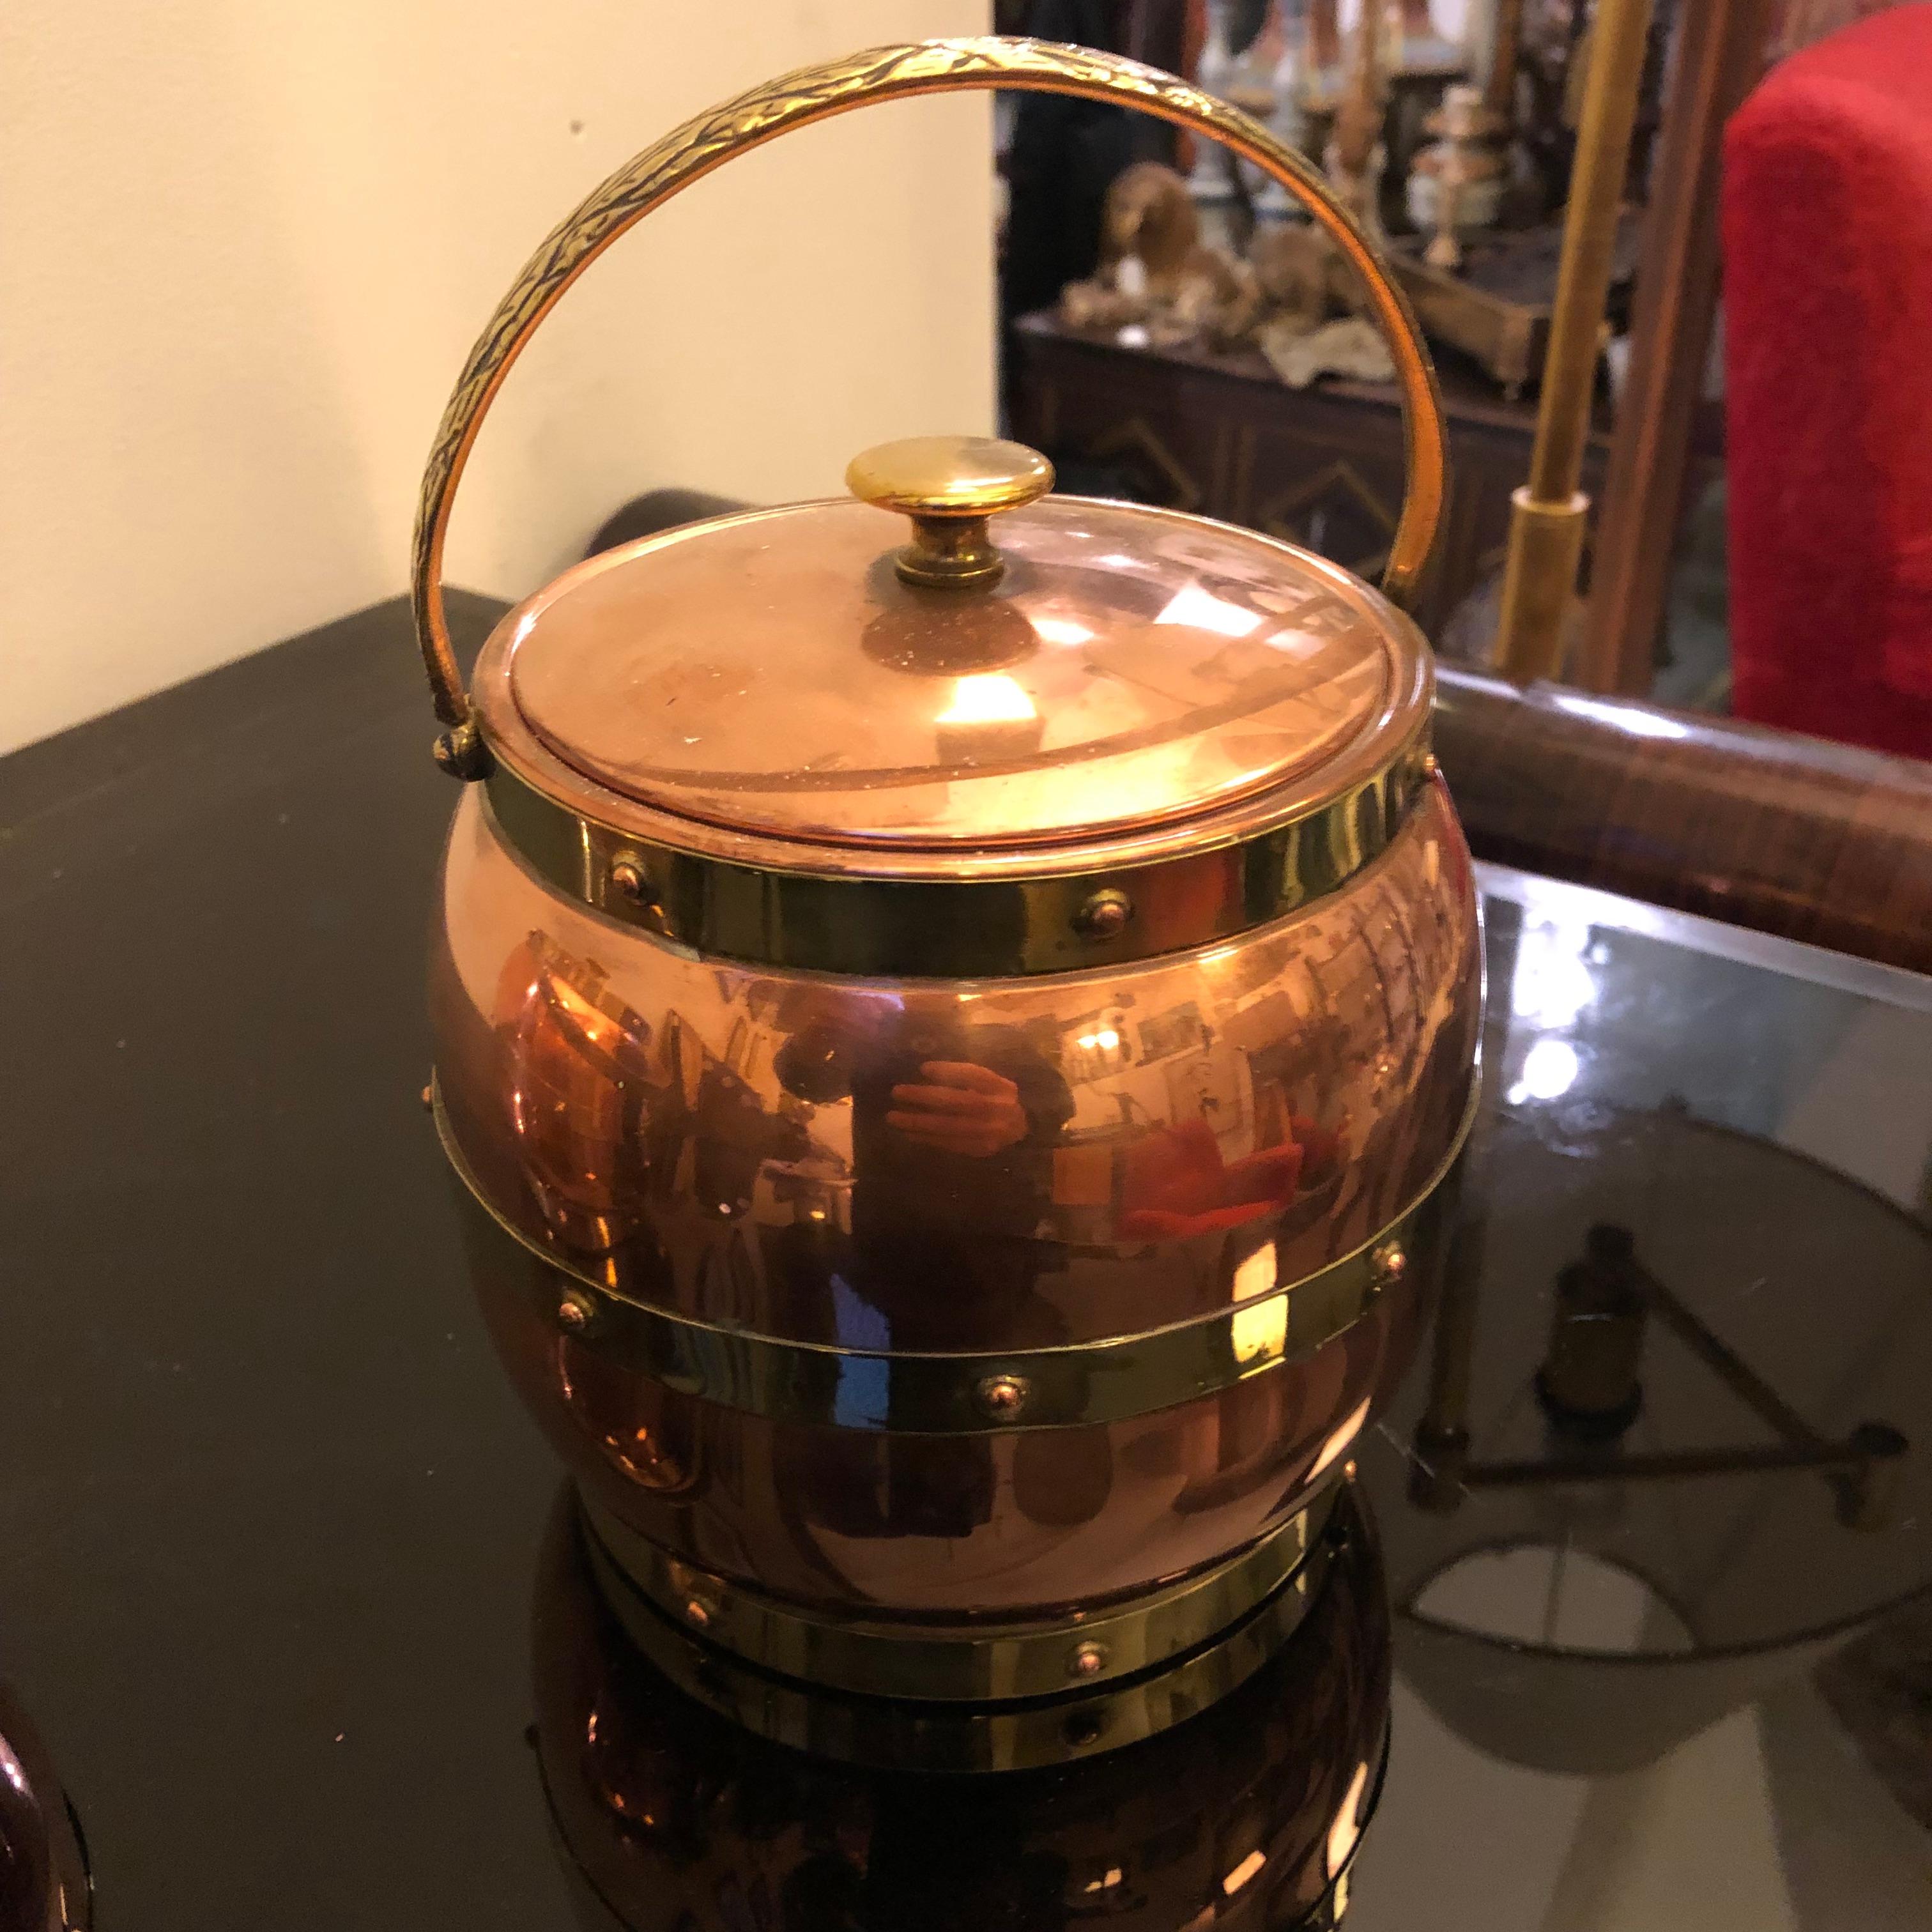 Arts & Crafts Copper and Brass British Ice Bucket, circa 1924 (Messing)